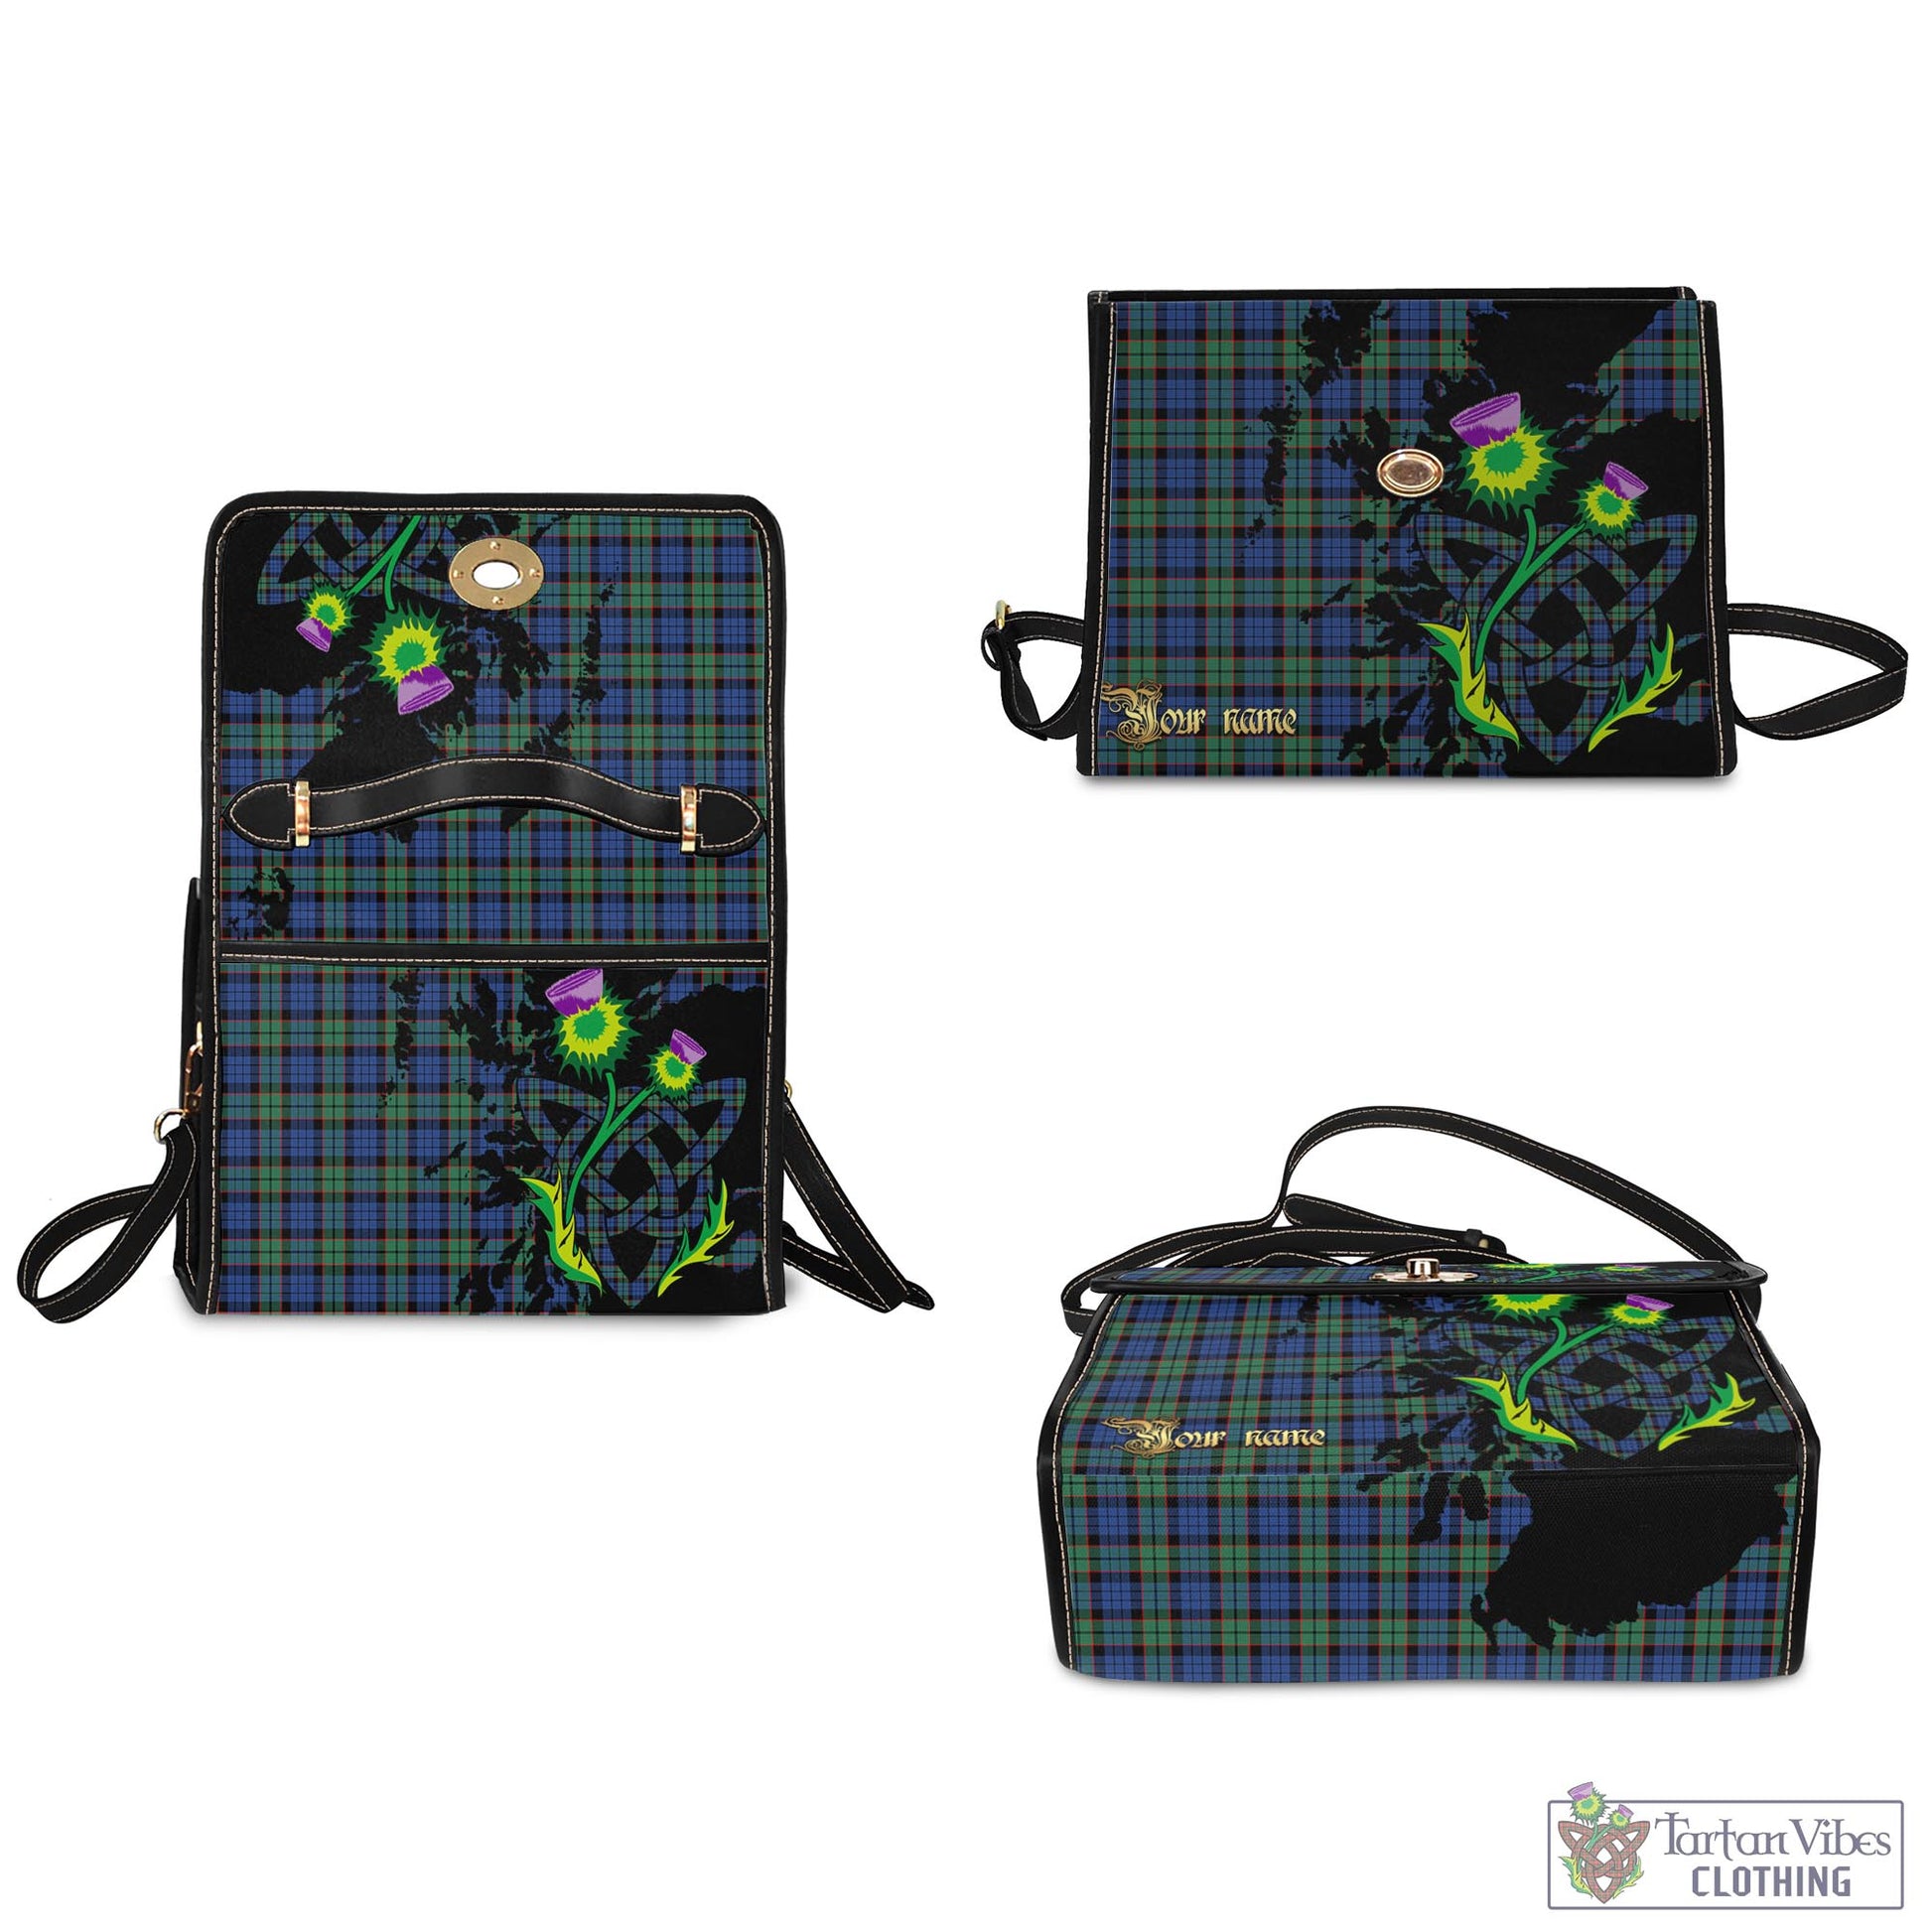 Tartan Vibes Clothing Fletcher Ancient Tartan Waterproof Canvas Bag with Scotland Map and Thistle Celtic Accents